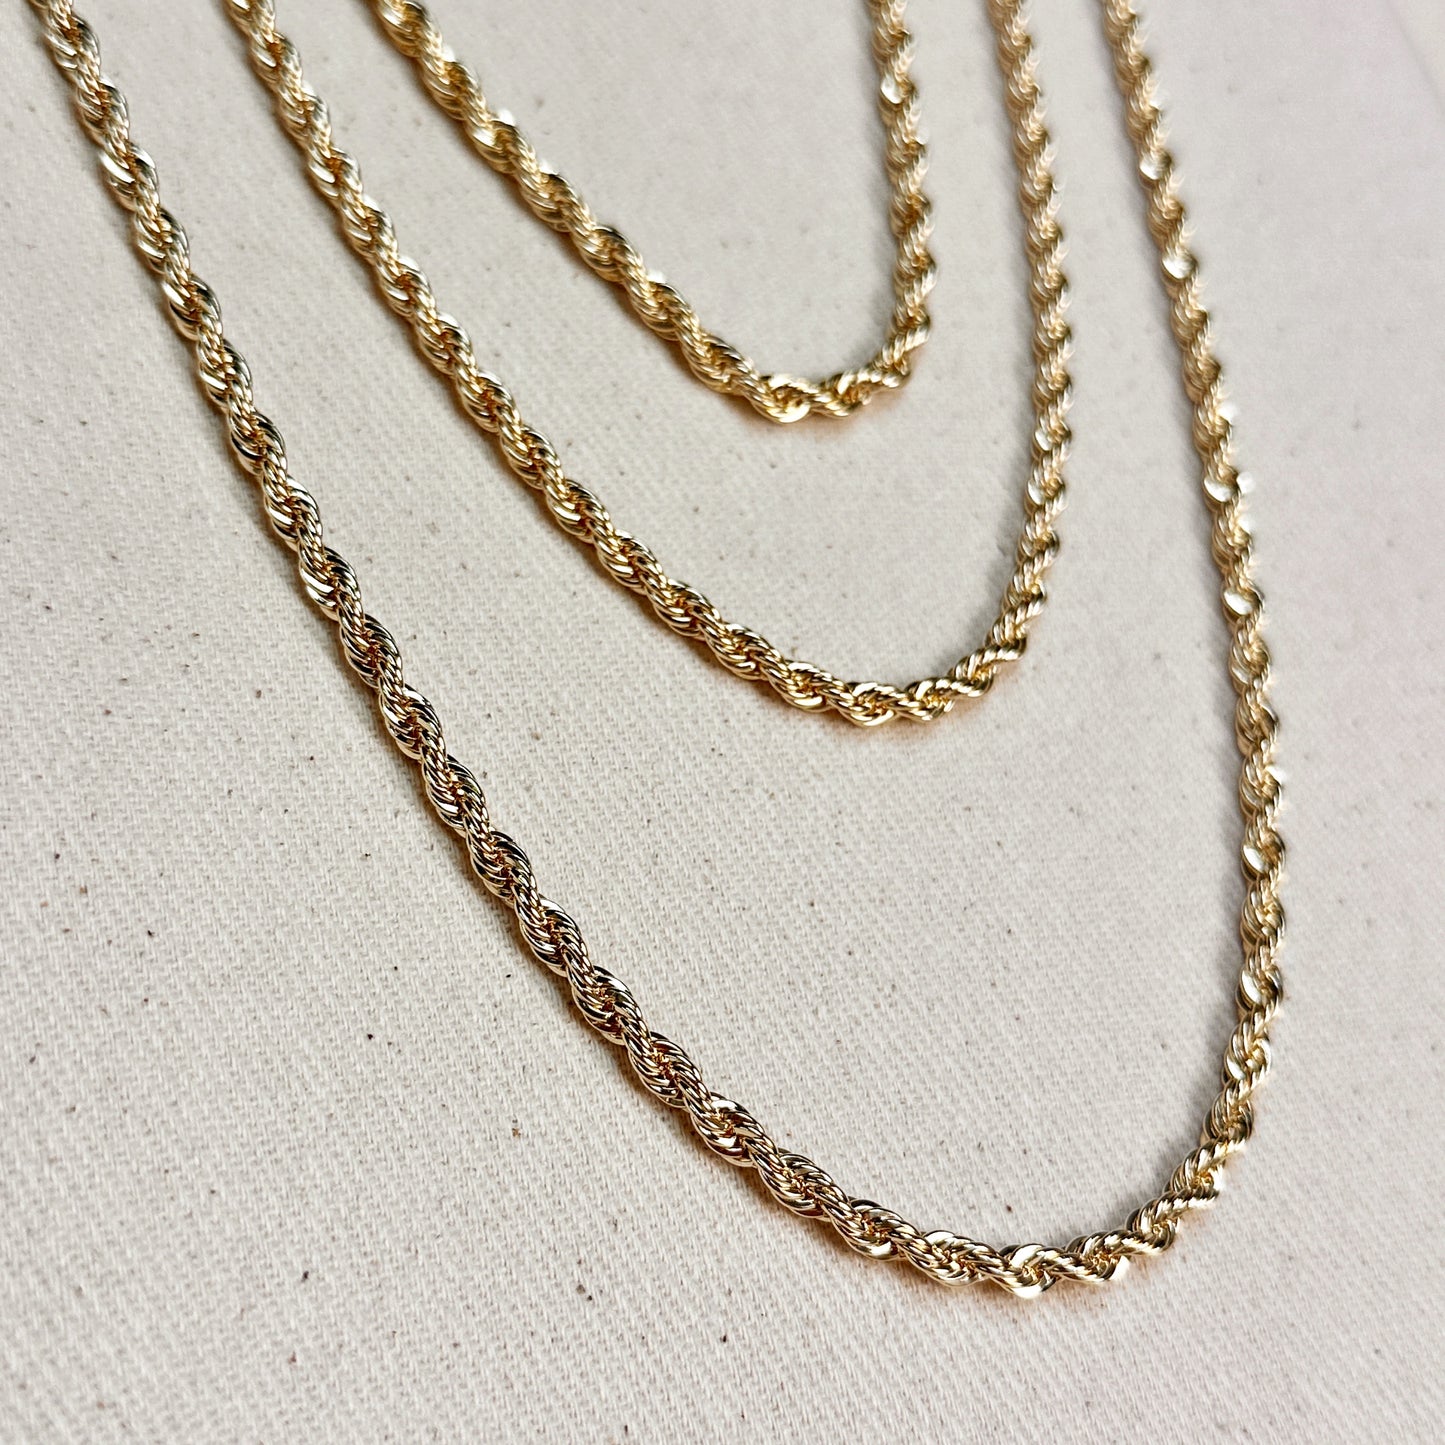 18k Gold Filled Rope Chain In 4.0mm Thickness Gold Chain